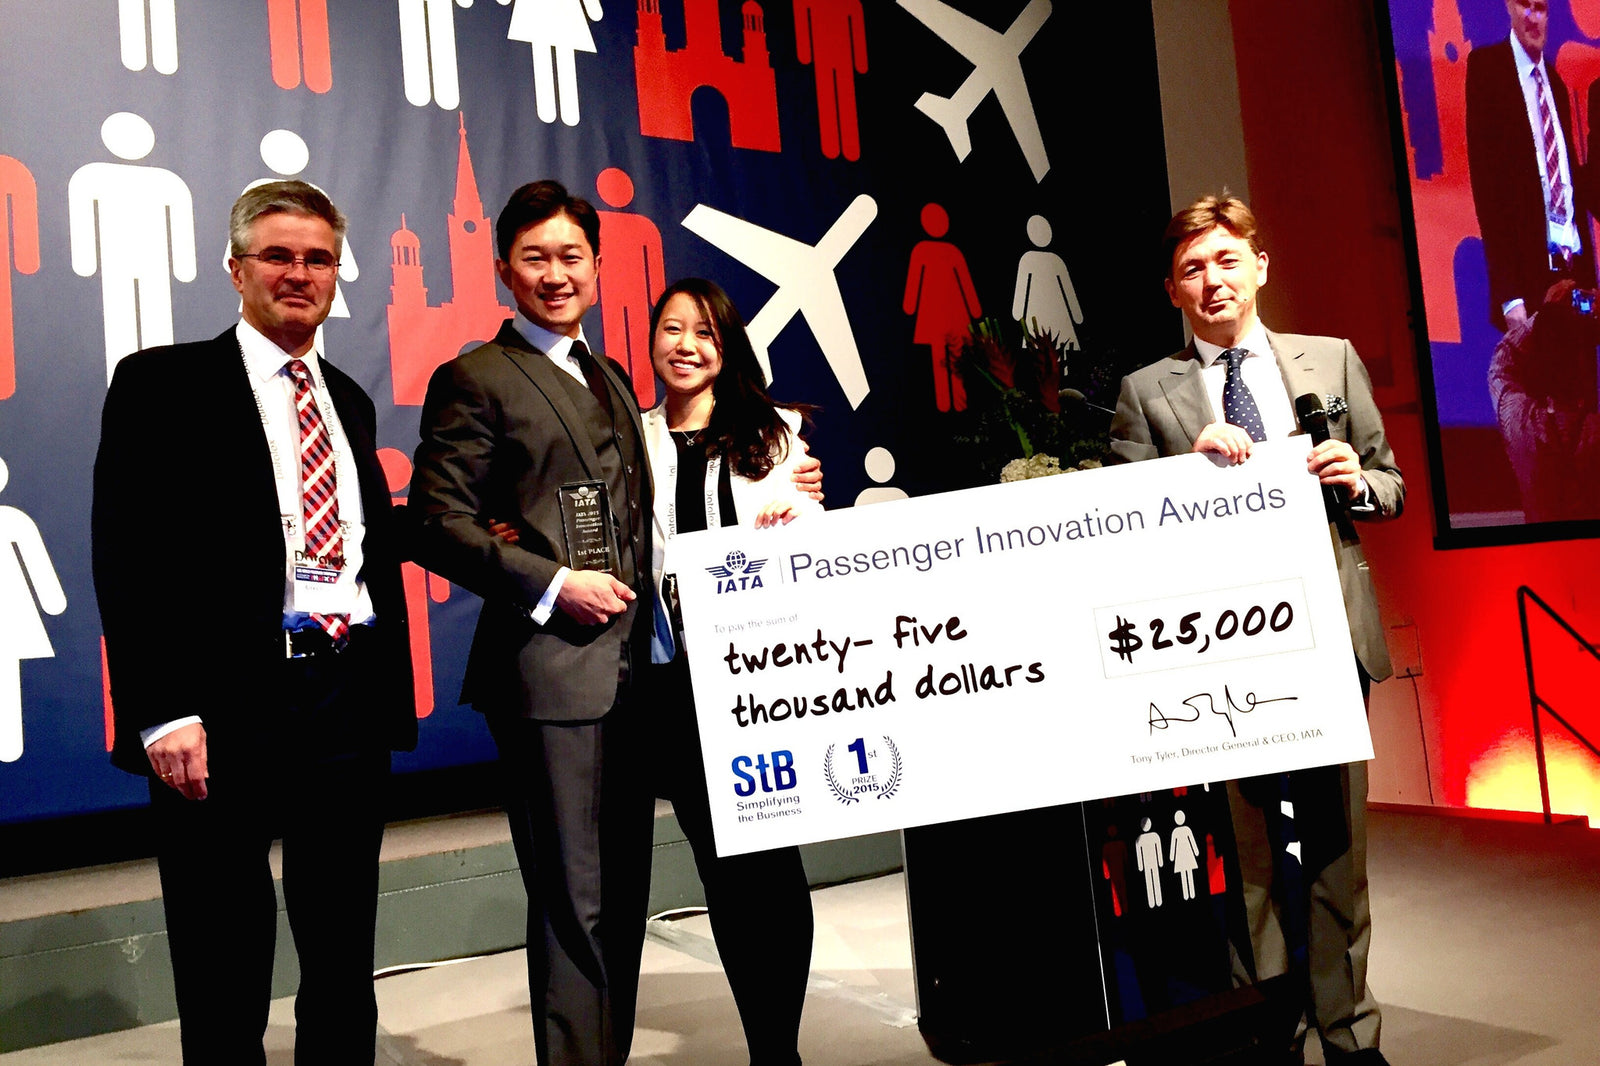 Soarigami is the winner of the Passenger Innovation Awards by IATA.